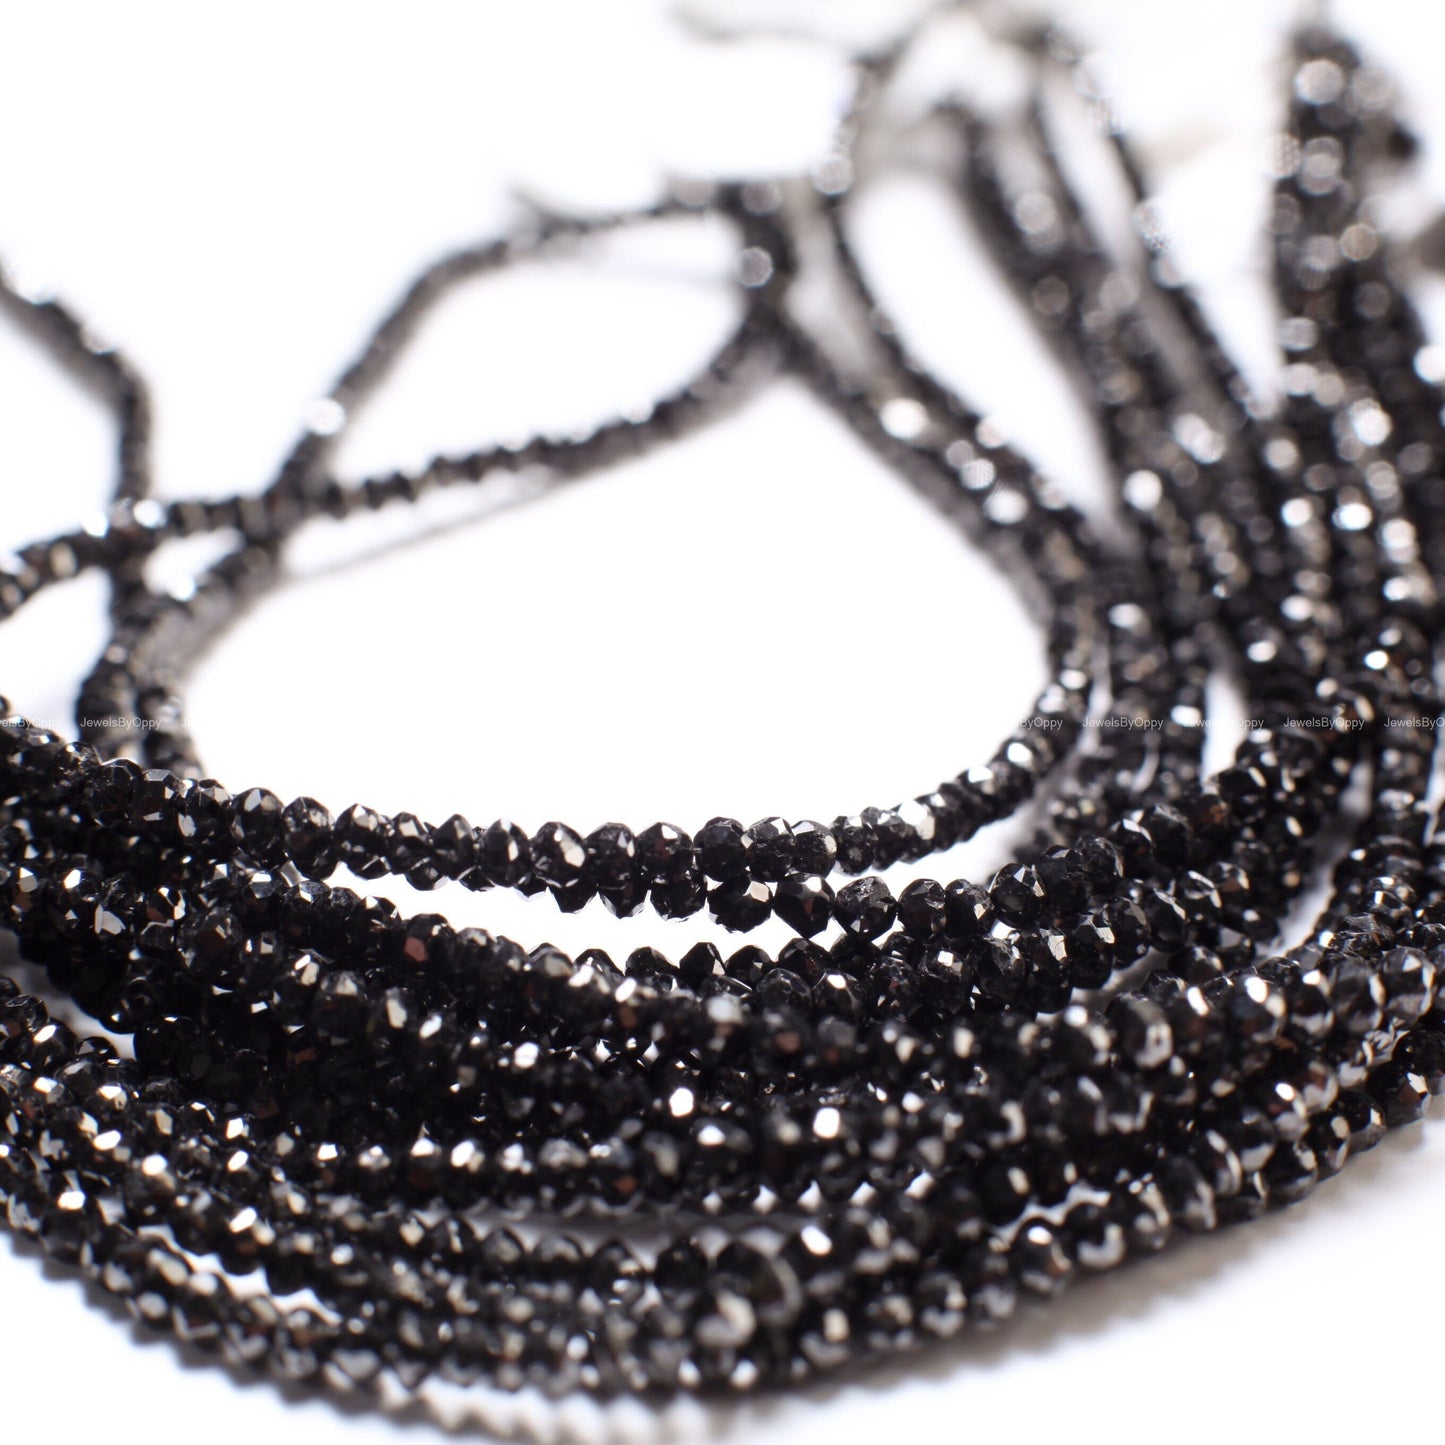 Natural Black Diamond Faceted Roundel Bead, AAA Quality 2-3mm Diamond Bead for Jewelry making. 1&quot; to 15&quot; full strand 12 cts